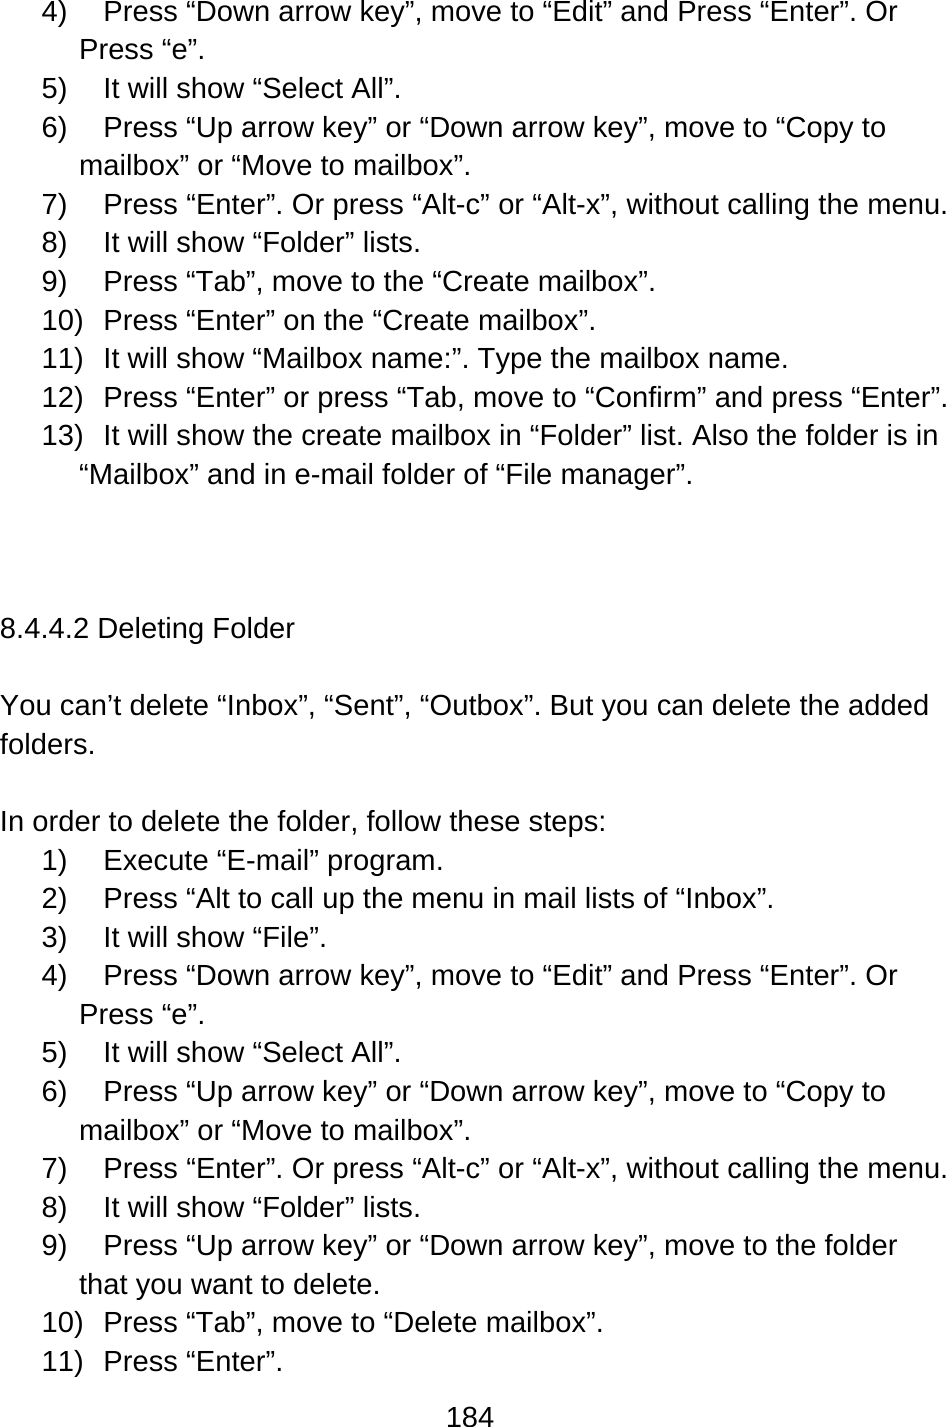 184  4)  Press “Down arrow key”, move to “Edit” and Press “Enter”. Or Press “e”. 5)  It will show “Select All”. 6)  Press “Up arrow key” or “Down arrow key”, move to “Copy to mailbox” or “Move to mailbox”.   7)  Press “Enter”. Or press “Alt-c” or “Alt-x”, without calling the menu. 8)  It will show “Folder” lists. 9)  Press “Tab”, move to the “Create mailbox”. 10)  Press “Enter” on the “Create mailbox”. 11)  It will show “Mailbox name:”. Type the mailbox name. 12)  Press “Enter” or press “Tab, move to “Confirm” and press “Enter”. 13)  It will show the create mailbox in “Folder” list. Also the folder is in “Mailbox” and in e-mail folder of “File manager”.    8.4.4.2 Deleting Folder  You can’t delete “Inbox”, “Sent”, “Outbox”. But you can delete the added folders.  In order to delete the folder, follow these steps: 1)  Execute “E-mail” program. 2)  Press “Alt to call up the menu in mail lists of “Inbox”. 3)  It will show “File”. 4)  Press “Down arrow key”, move to “Edit” and Press “Enter”. Or Press “e”. 5)  It will show “Select All”. 6)  Press “Up arrow key” or “Down arrow key”, move to “Copy to mailbox” or “Move to mailbox”.   7)  Press “Enter”. Or press “Alt-c” or “Alt-x”, without calling the menu. 8)  It will show “Folder” lists. 9)  Press “Up arrow key” or “Down arrow key”, move to the folder that you want to delete. 10)  Press “Tab”, move to “Delete mailbox”. 11) Press “Enter”. 